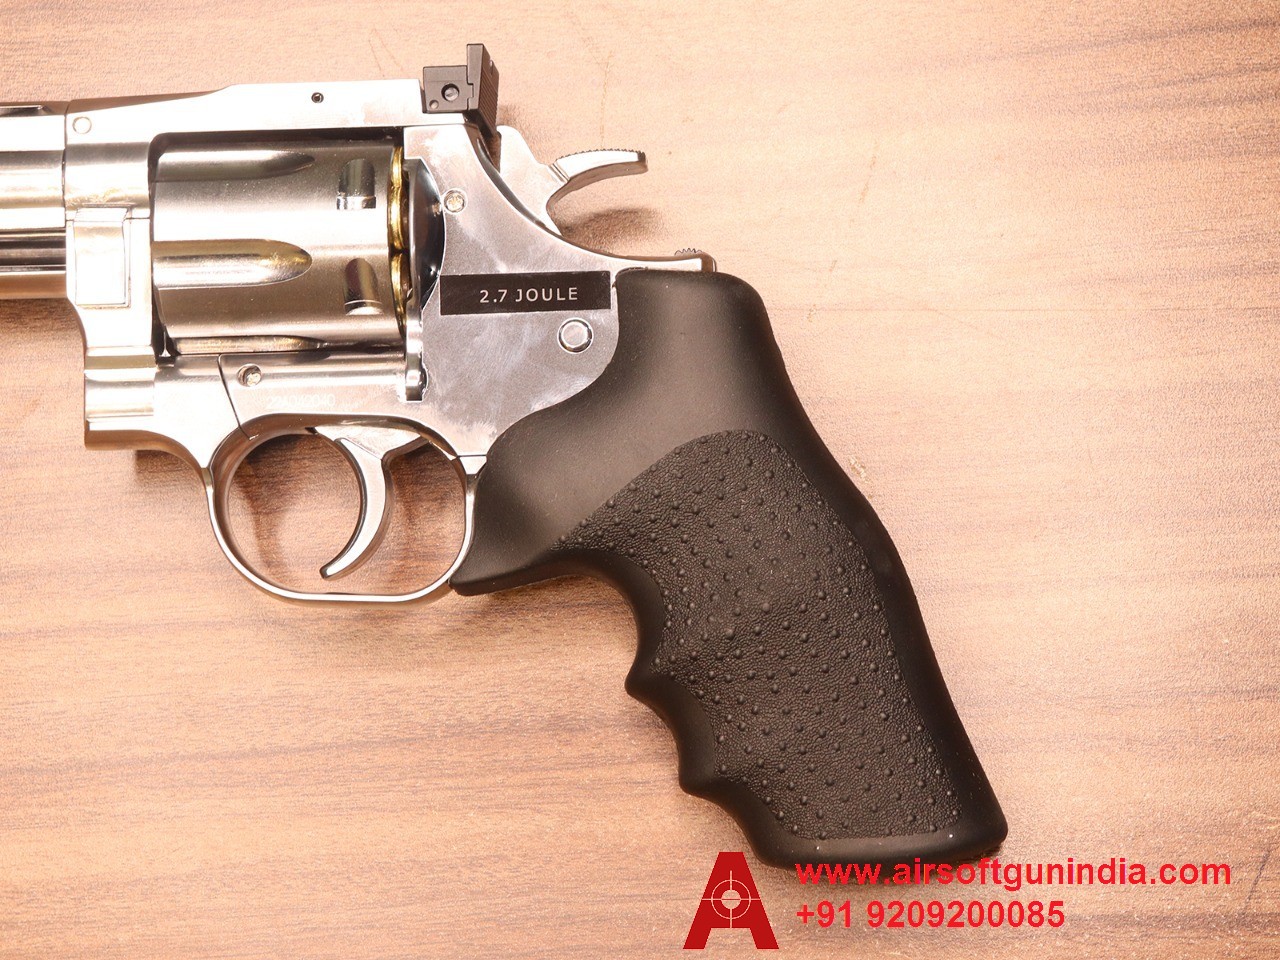 Dan Wesson 715 4 Inch Pellet Revolver, Silver By Airsoft Gun India at Rs  52000, Revolver in Goregaon